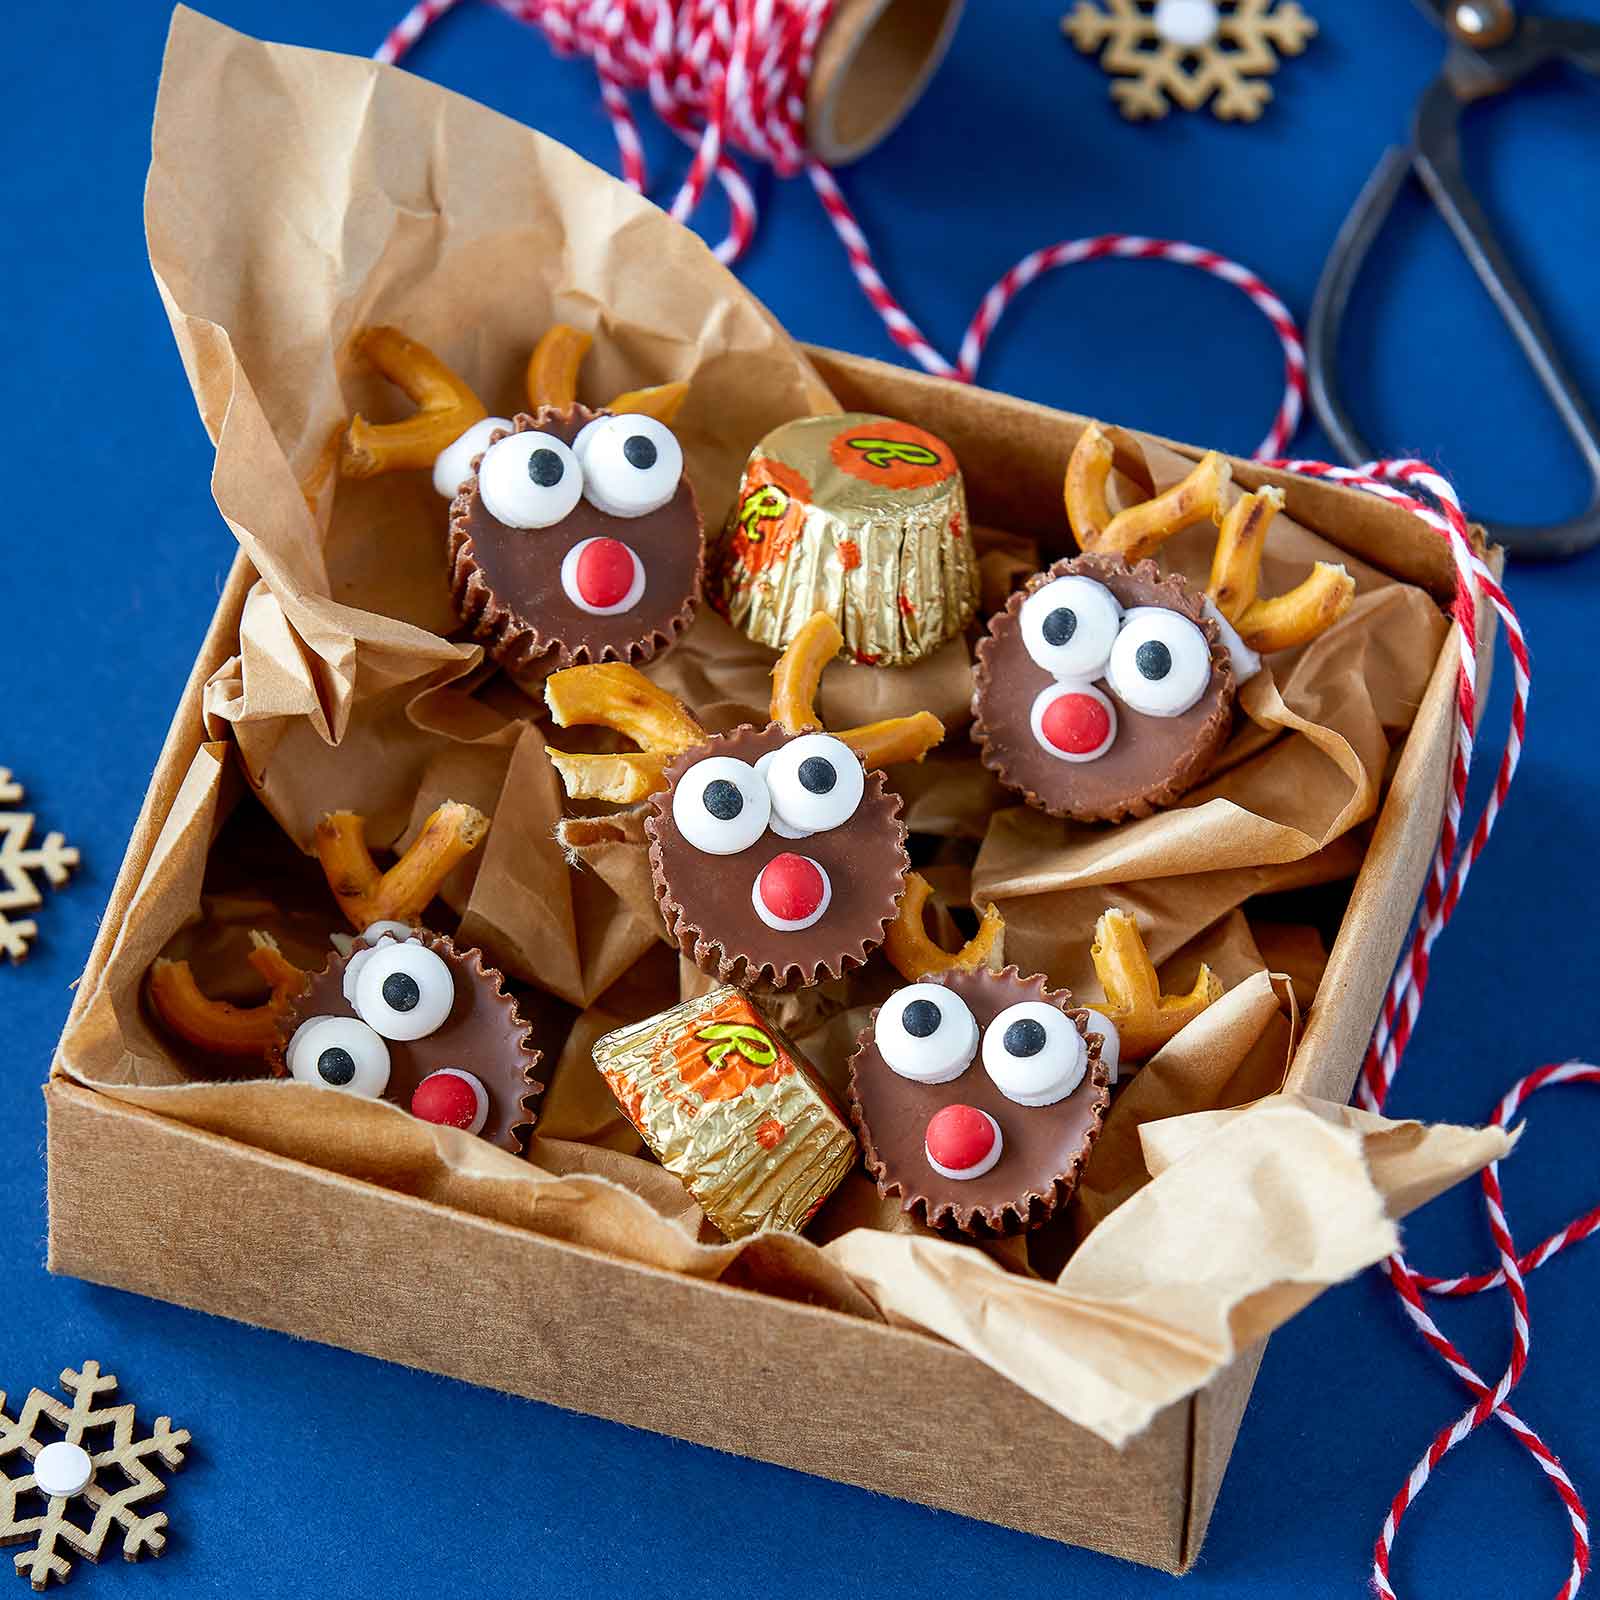 Gluten-Free Peanut Butter Reindeer arranged in a gold box with red and white twine ready for Christmas gifting.